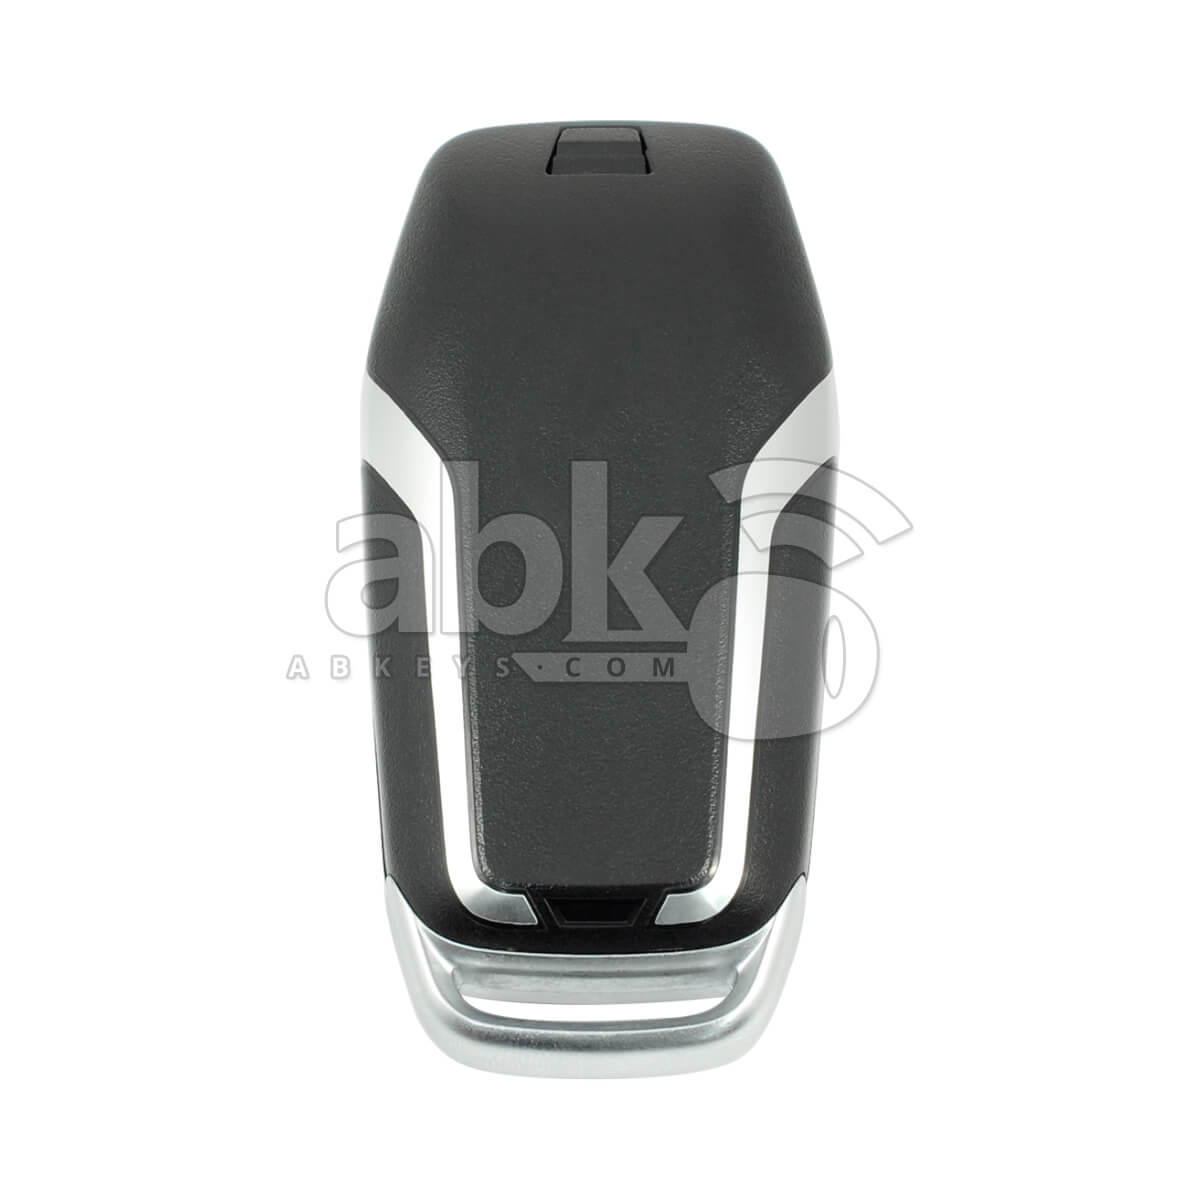 Ford Fusion 2015+ Smart Key Cover 4Buttons - ABK-1600 - ABKEYS.COM